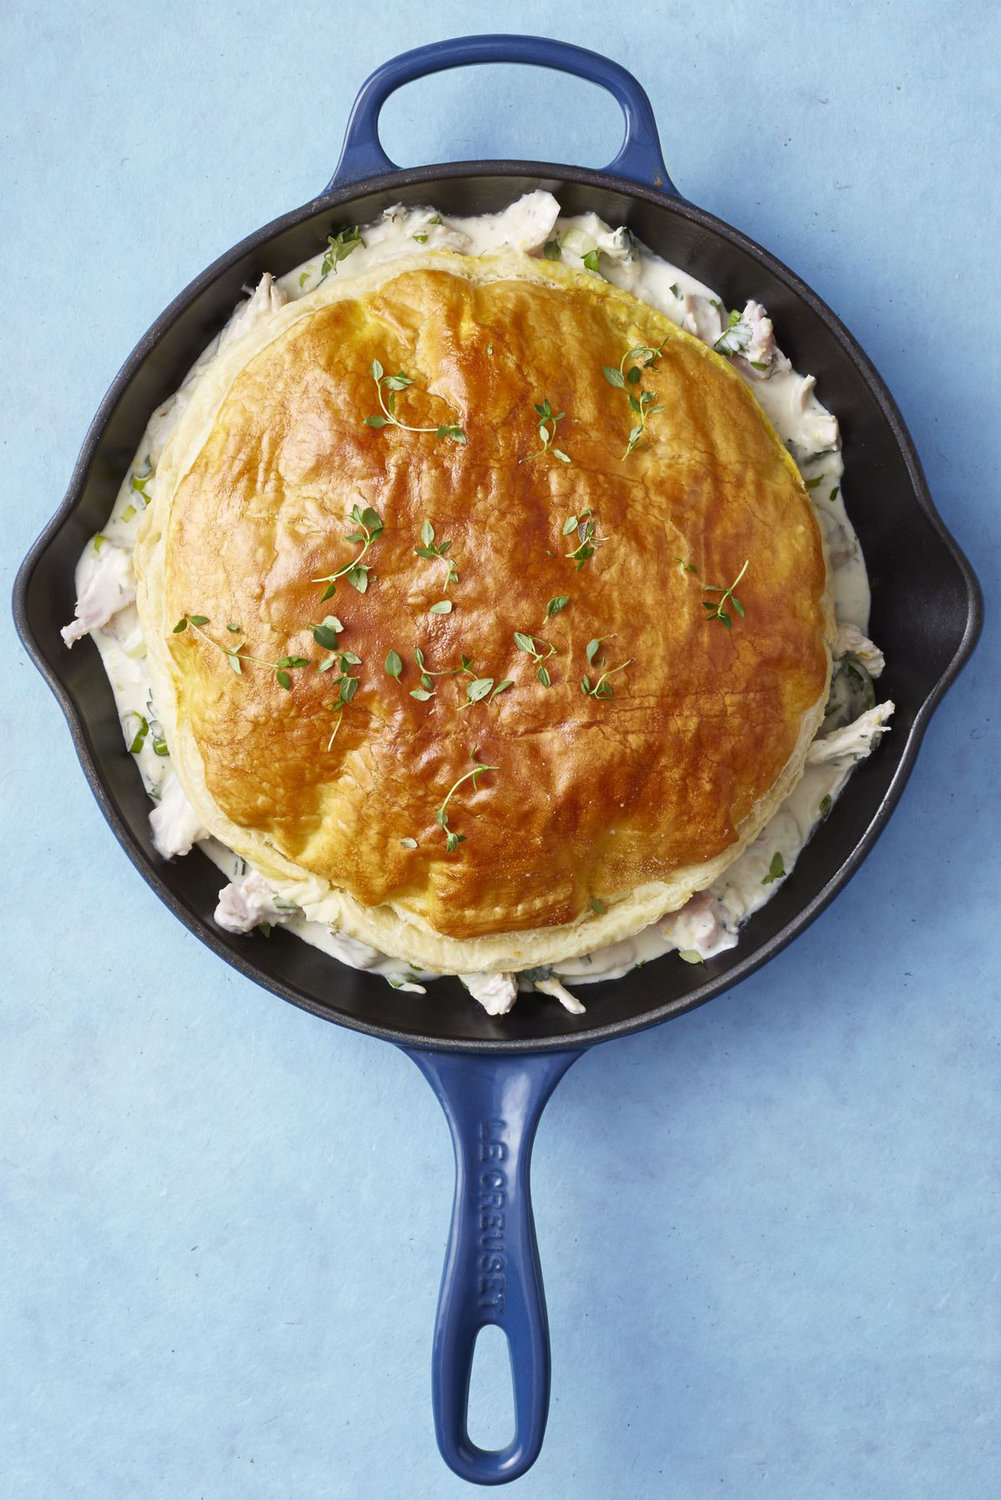 Skillet pot pie is one way to use up leftover Thanksgiving turkey